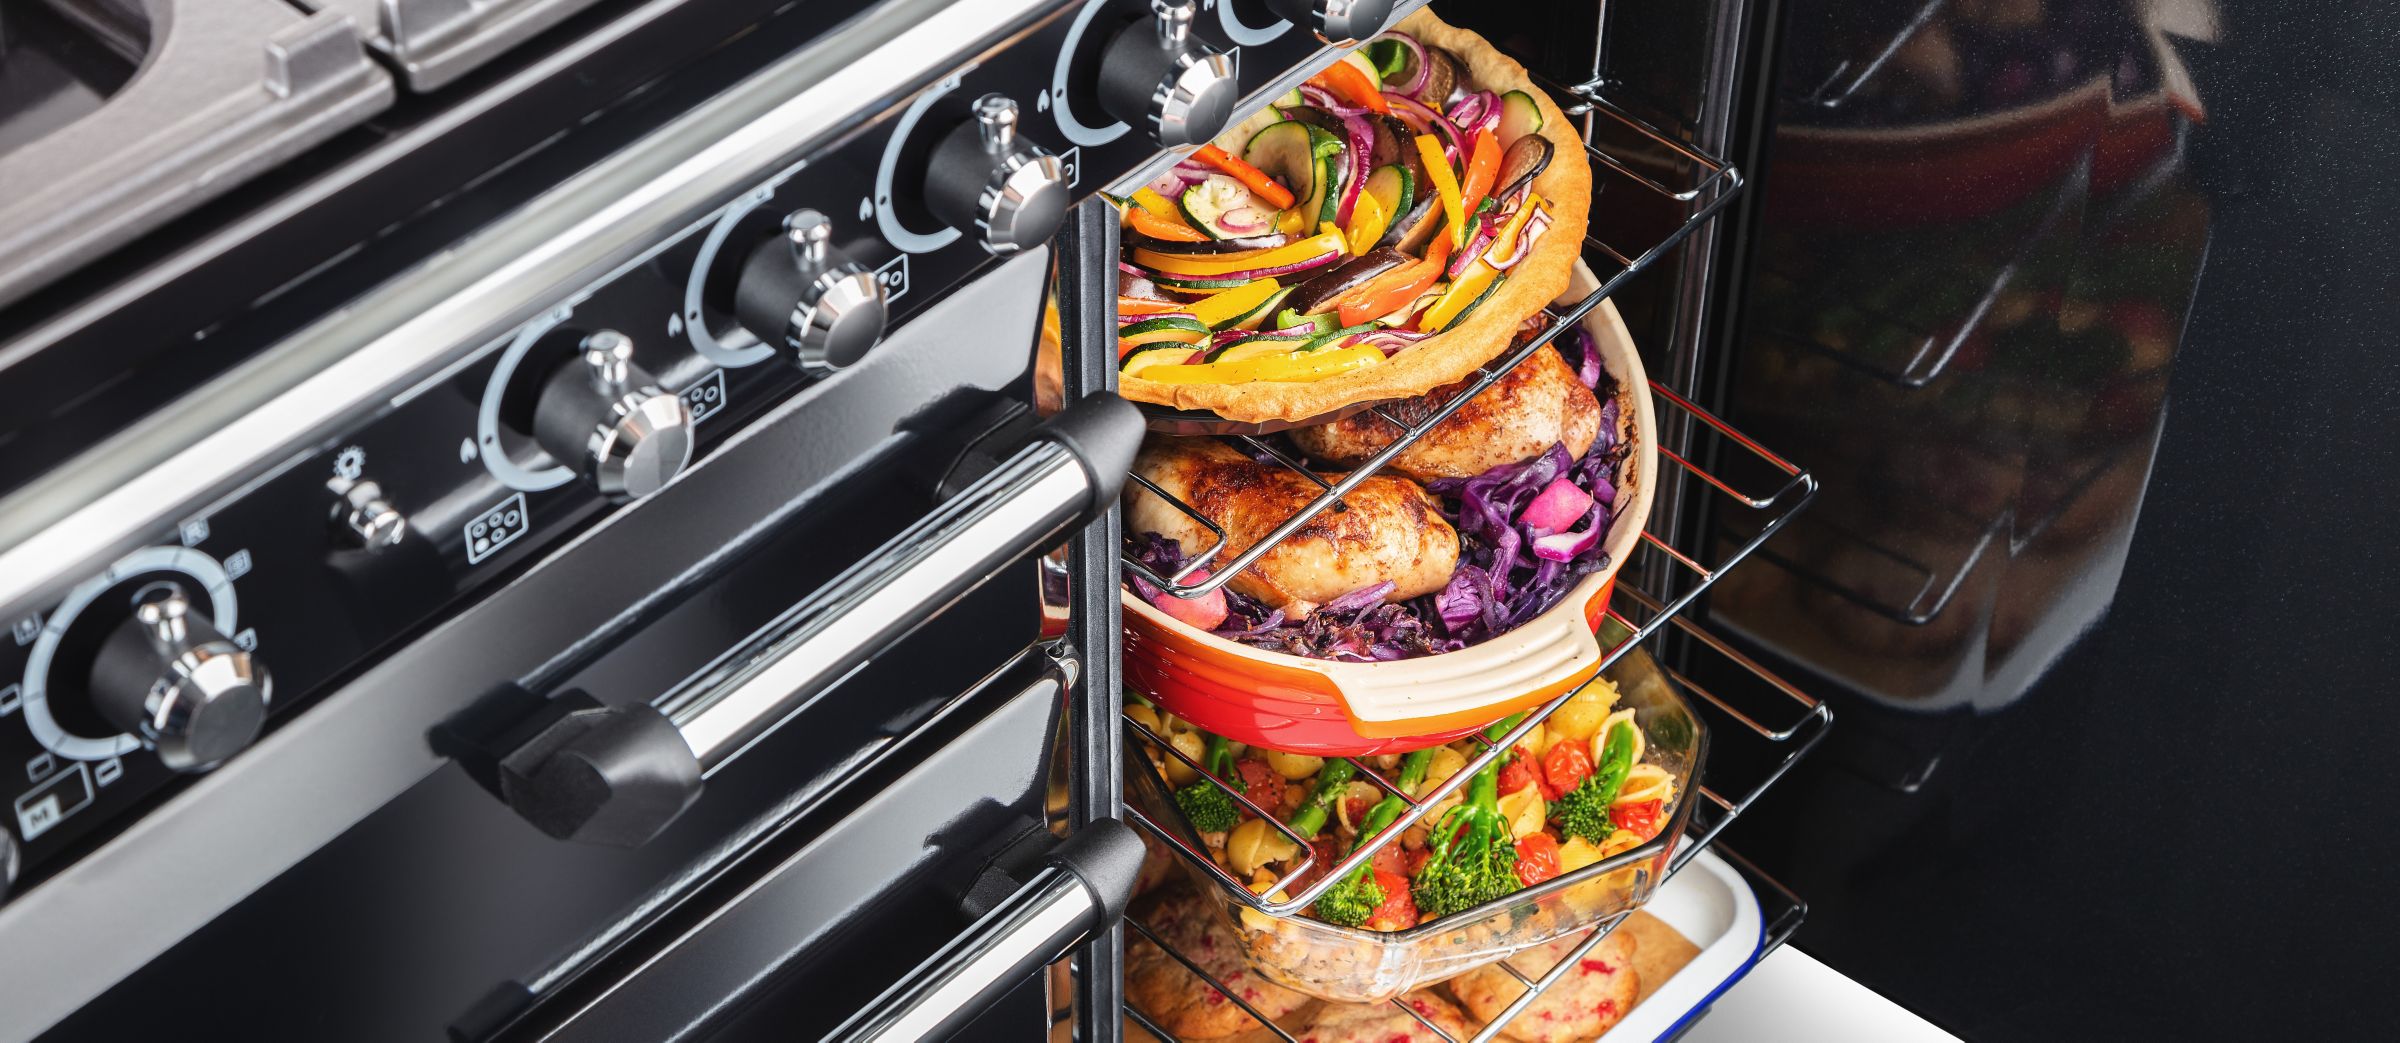 product shot of a rangemaster cooker being used to cook food